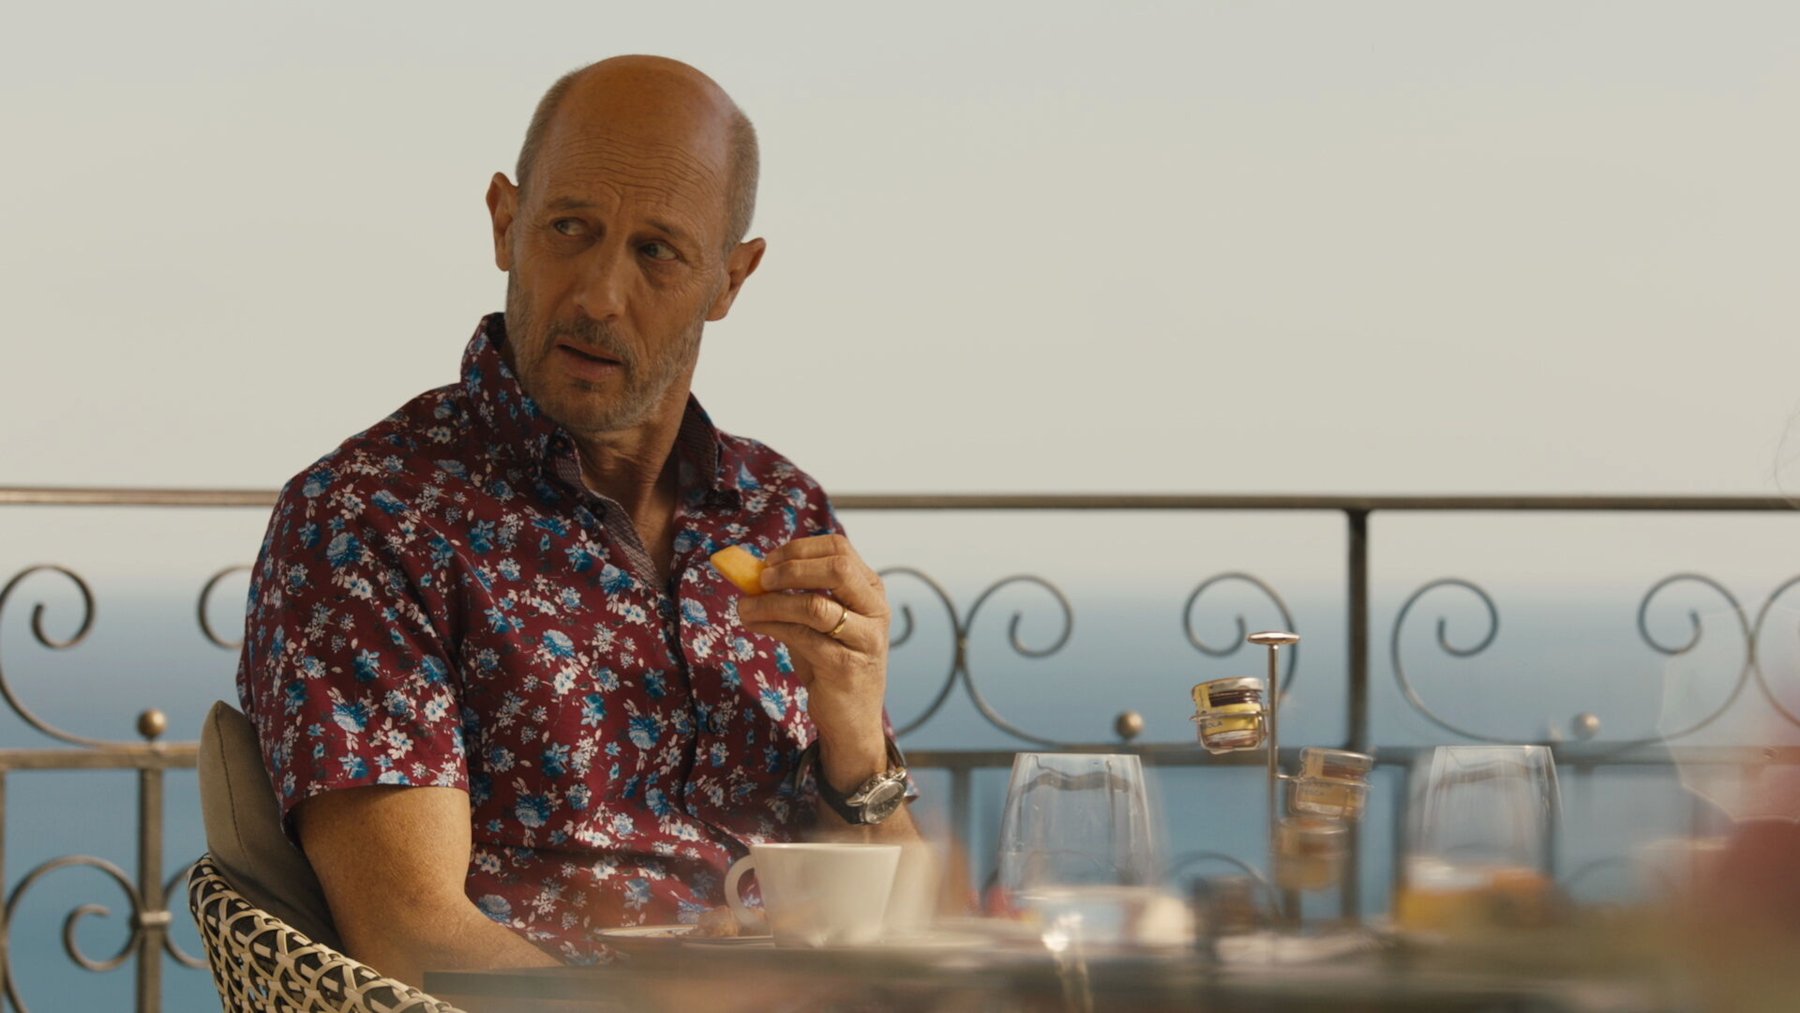 Jon Gries as Greg in 'The White Lotus' Season 2. He's sitting at a table, holding a drink, and looking to the side of him.